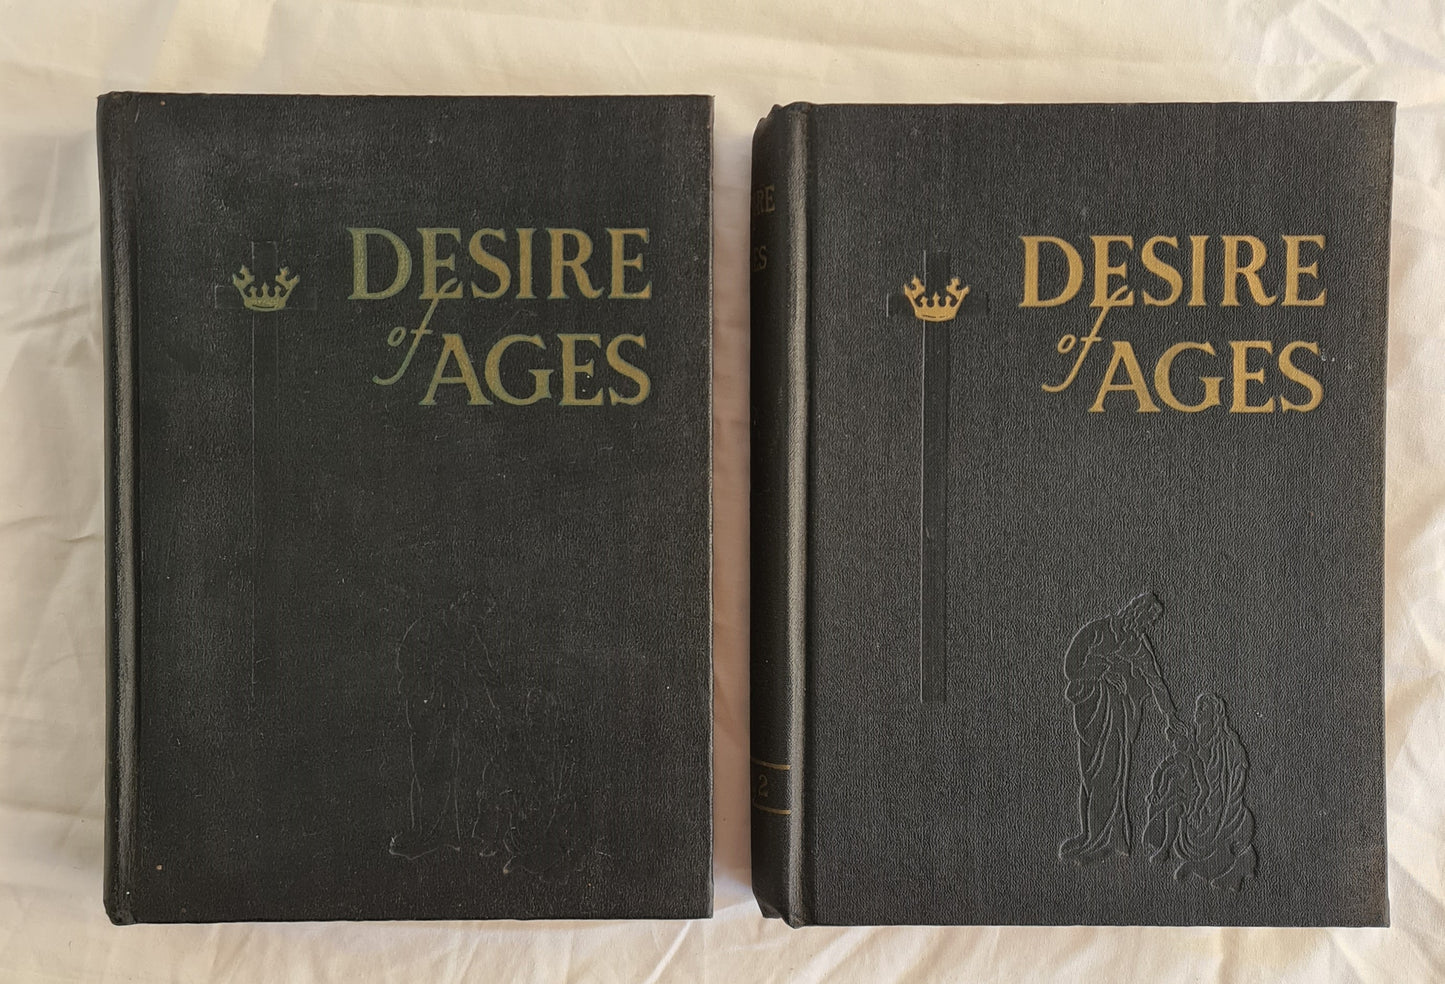 The Desire of Ages  Volumes 1 and 2  by Mrs. E. G. White